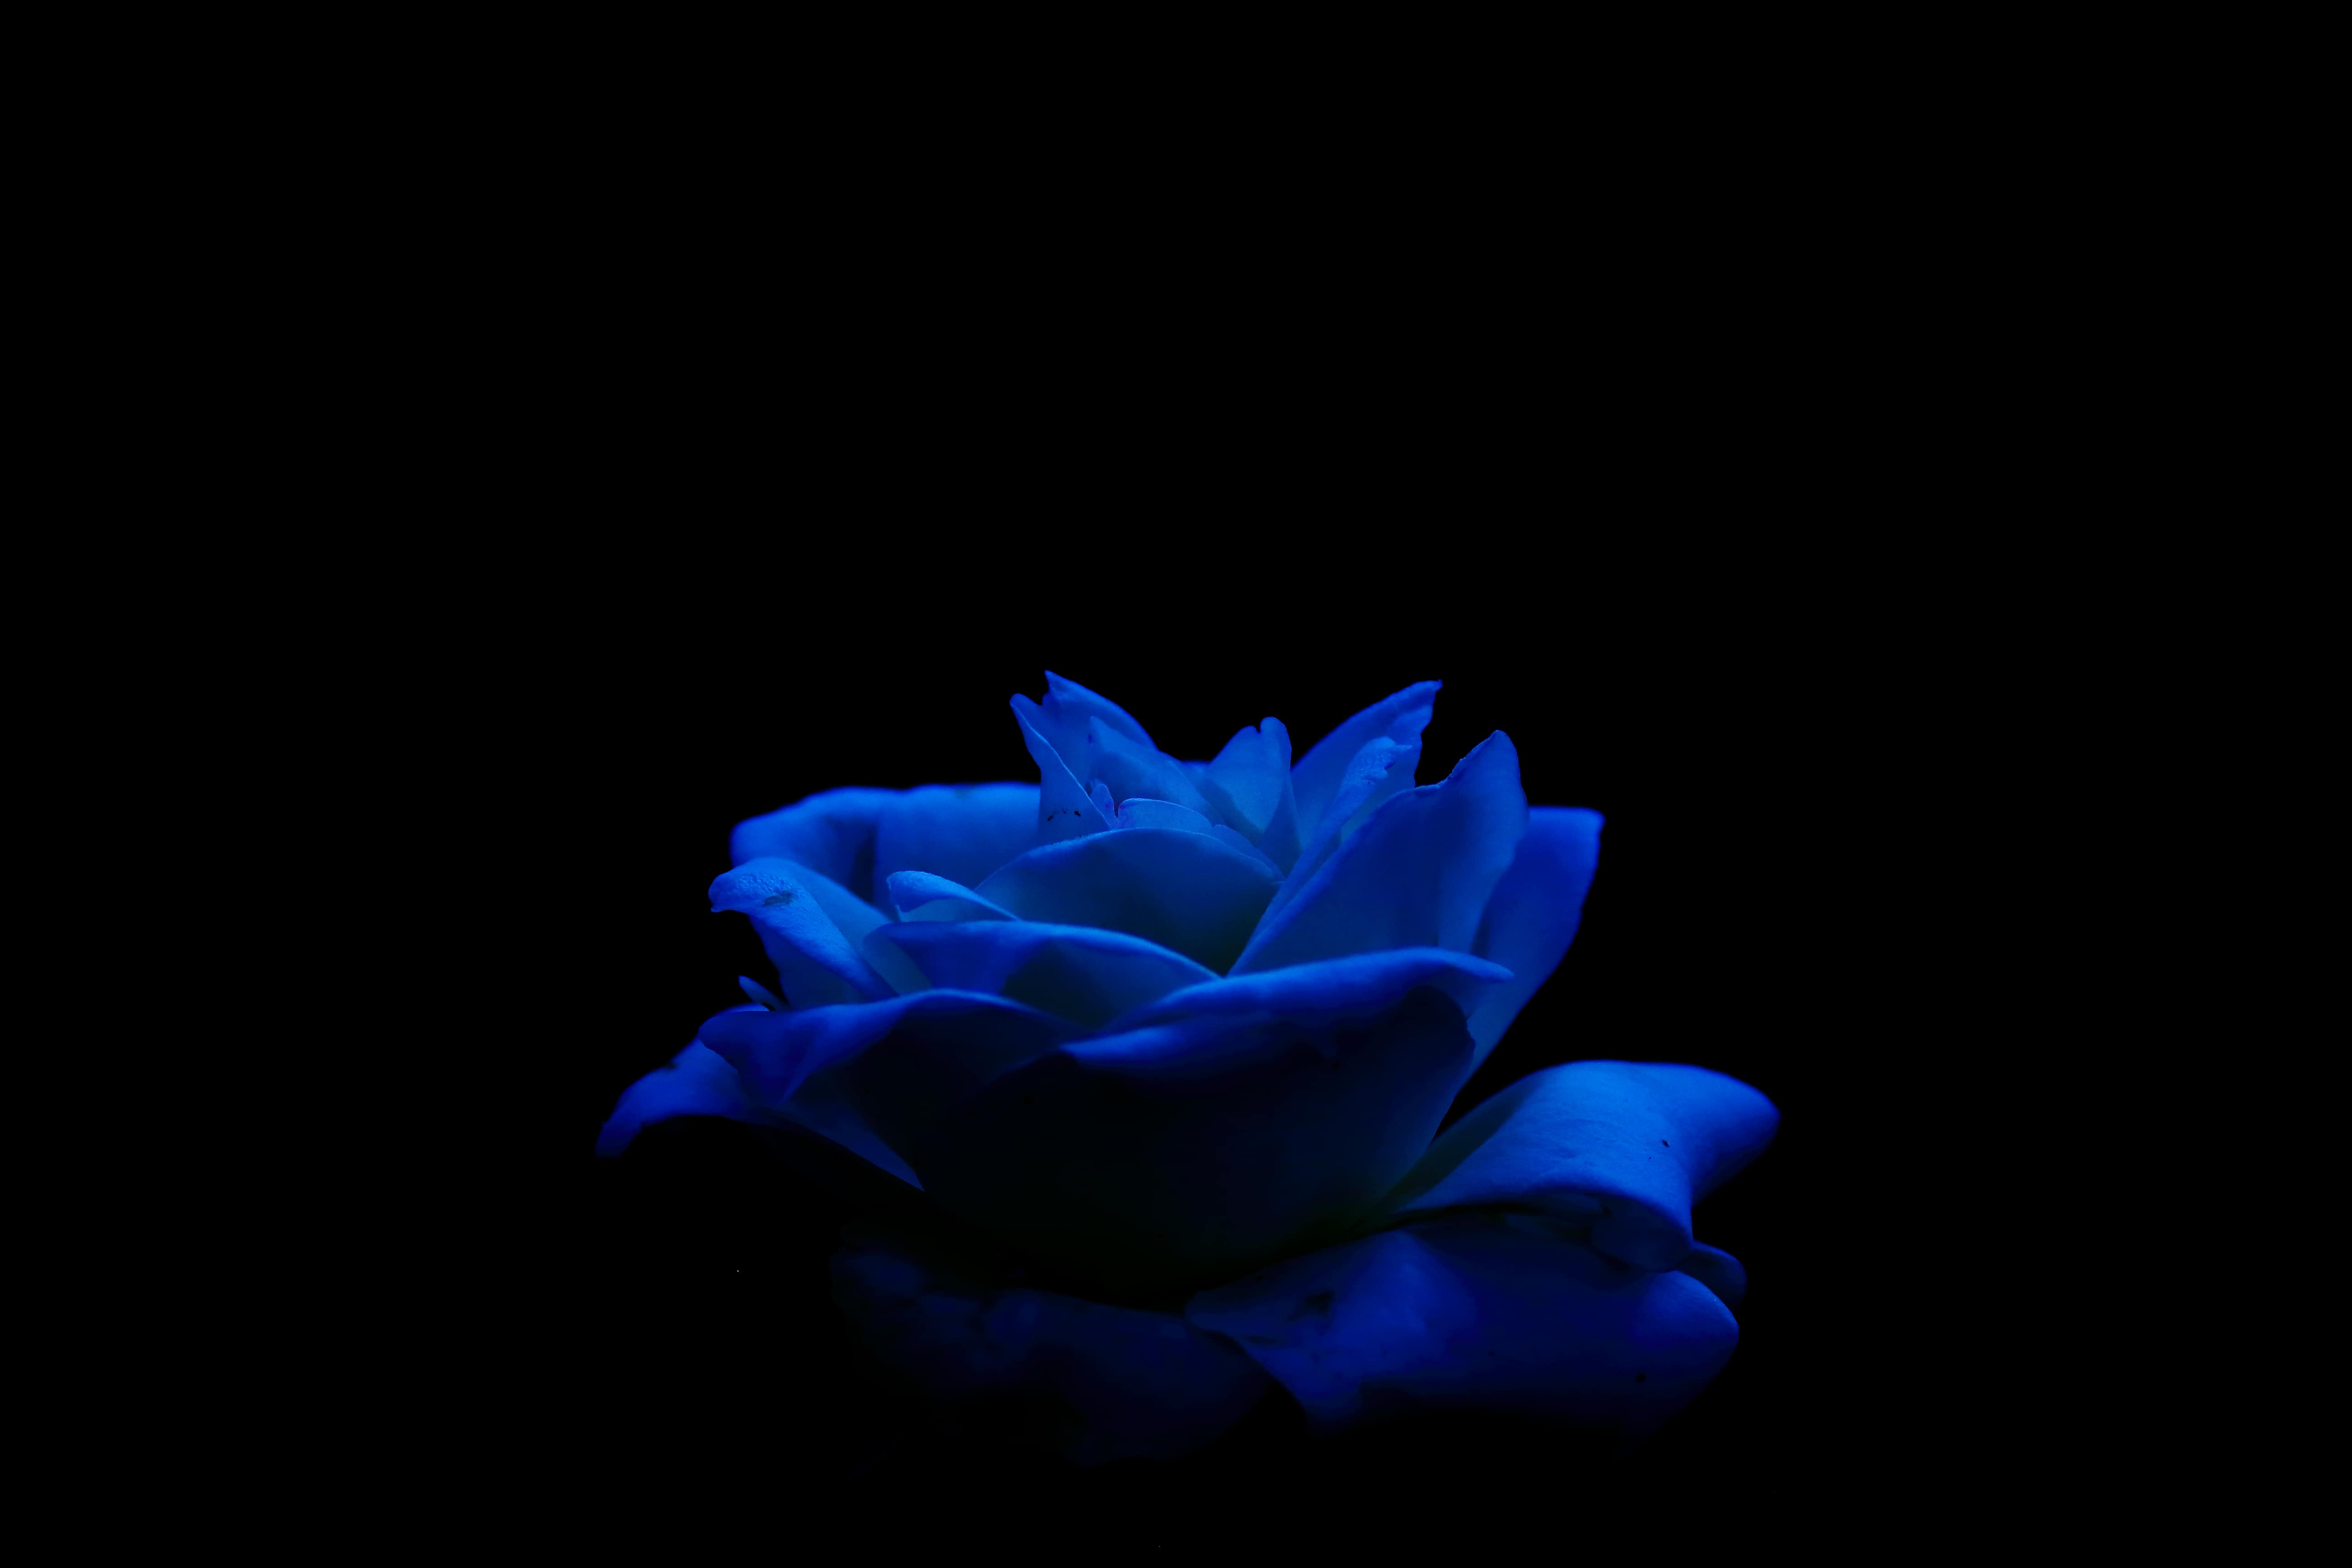 A White rose captured as a Blue rose